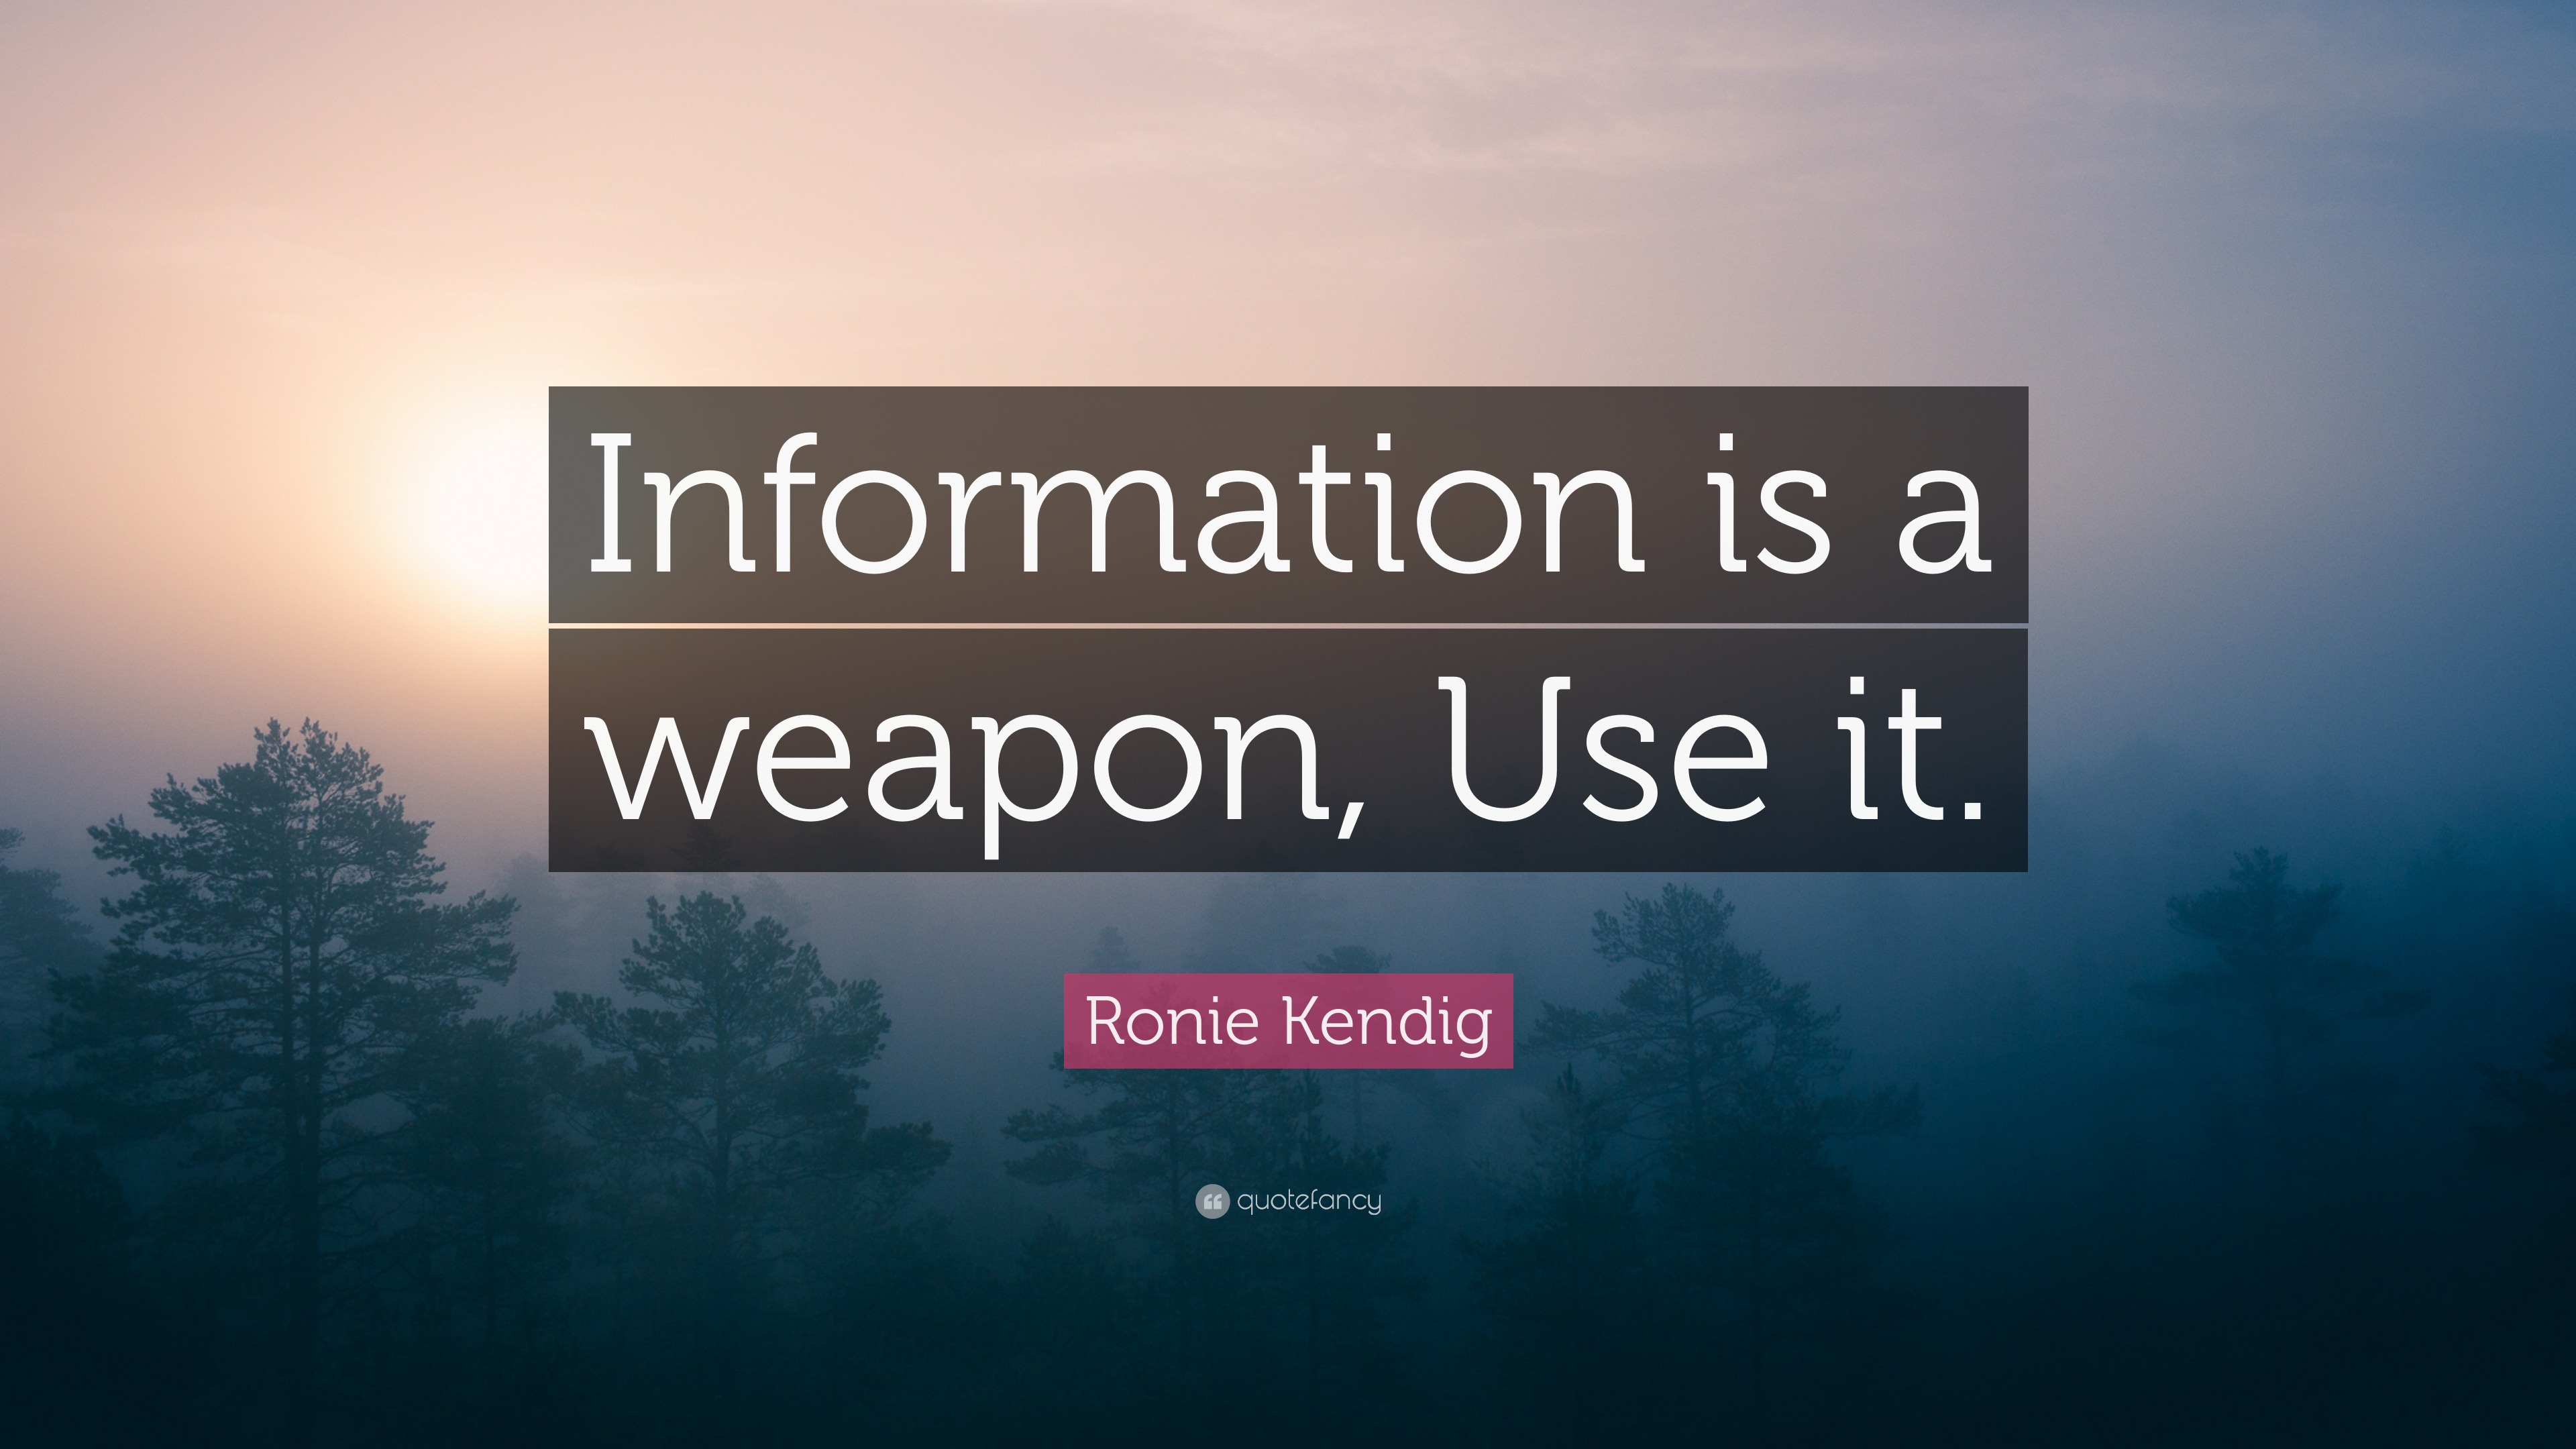 Ronie Kendig Quote: “Information is a weapon, Use it.”